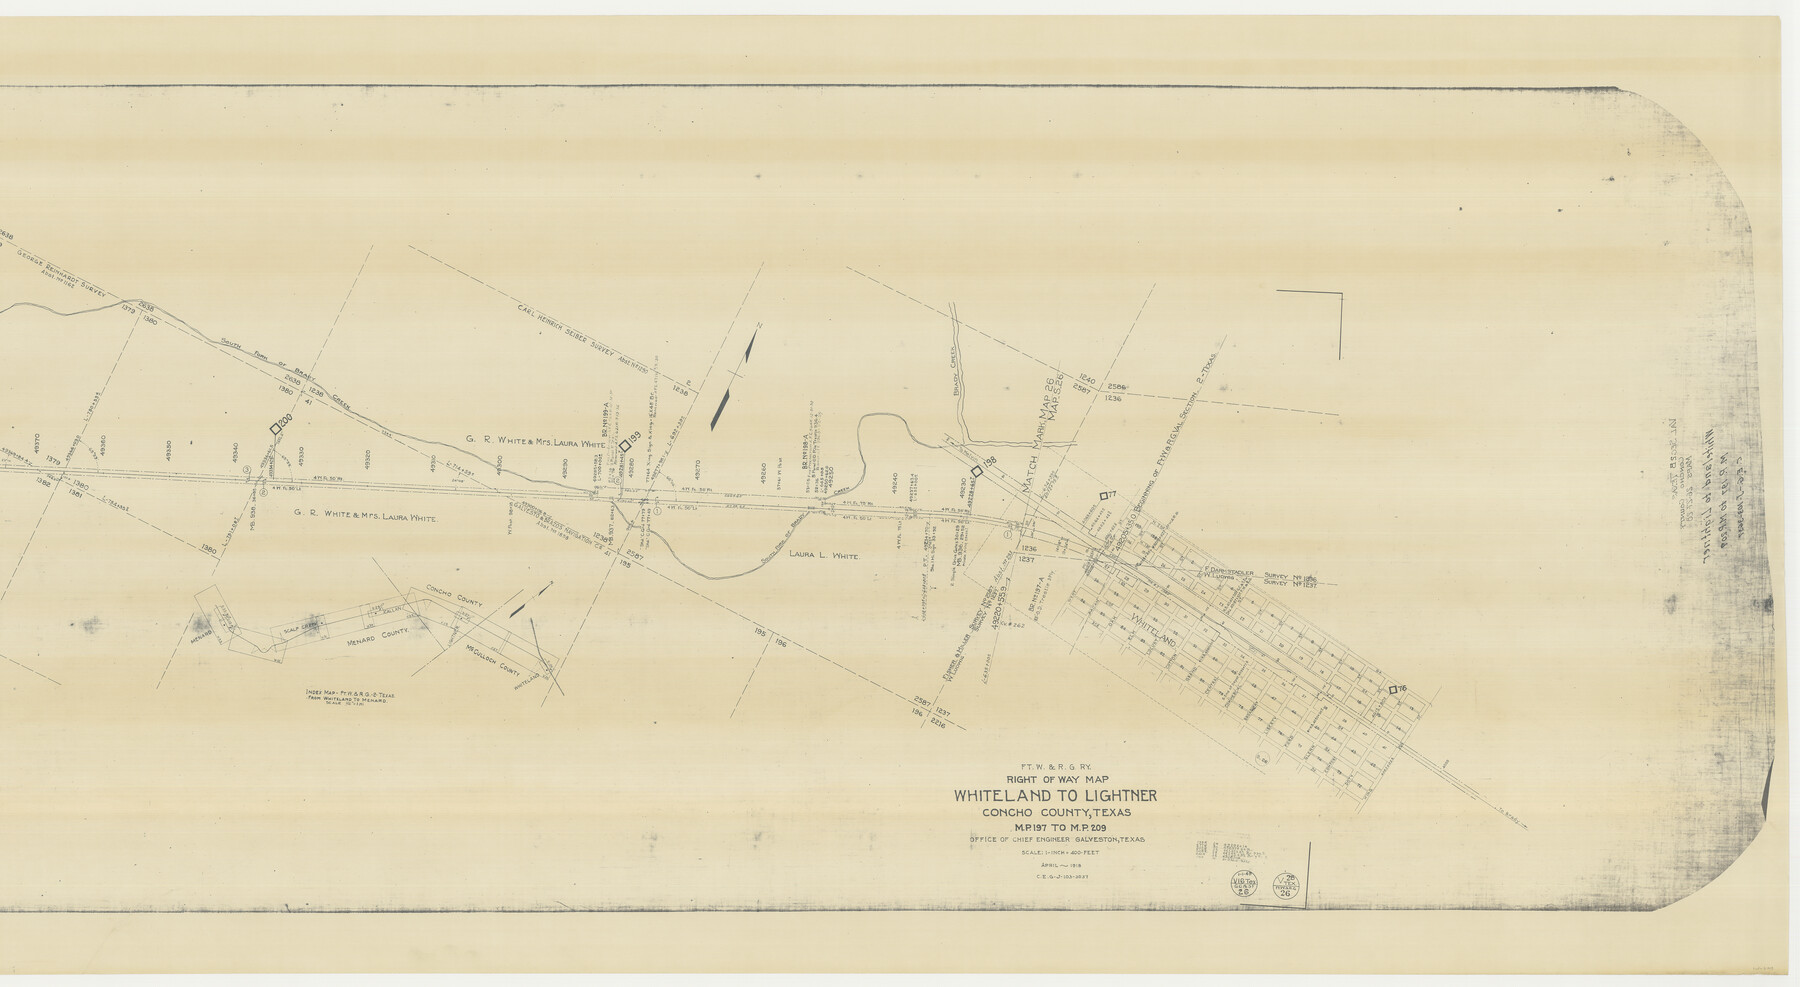 61413, FT. W. & R. G. Ry. Right of Way Map, Whiteland to Lightner, Concho County, Texas, General Map Collection